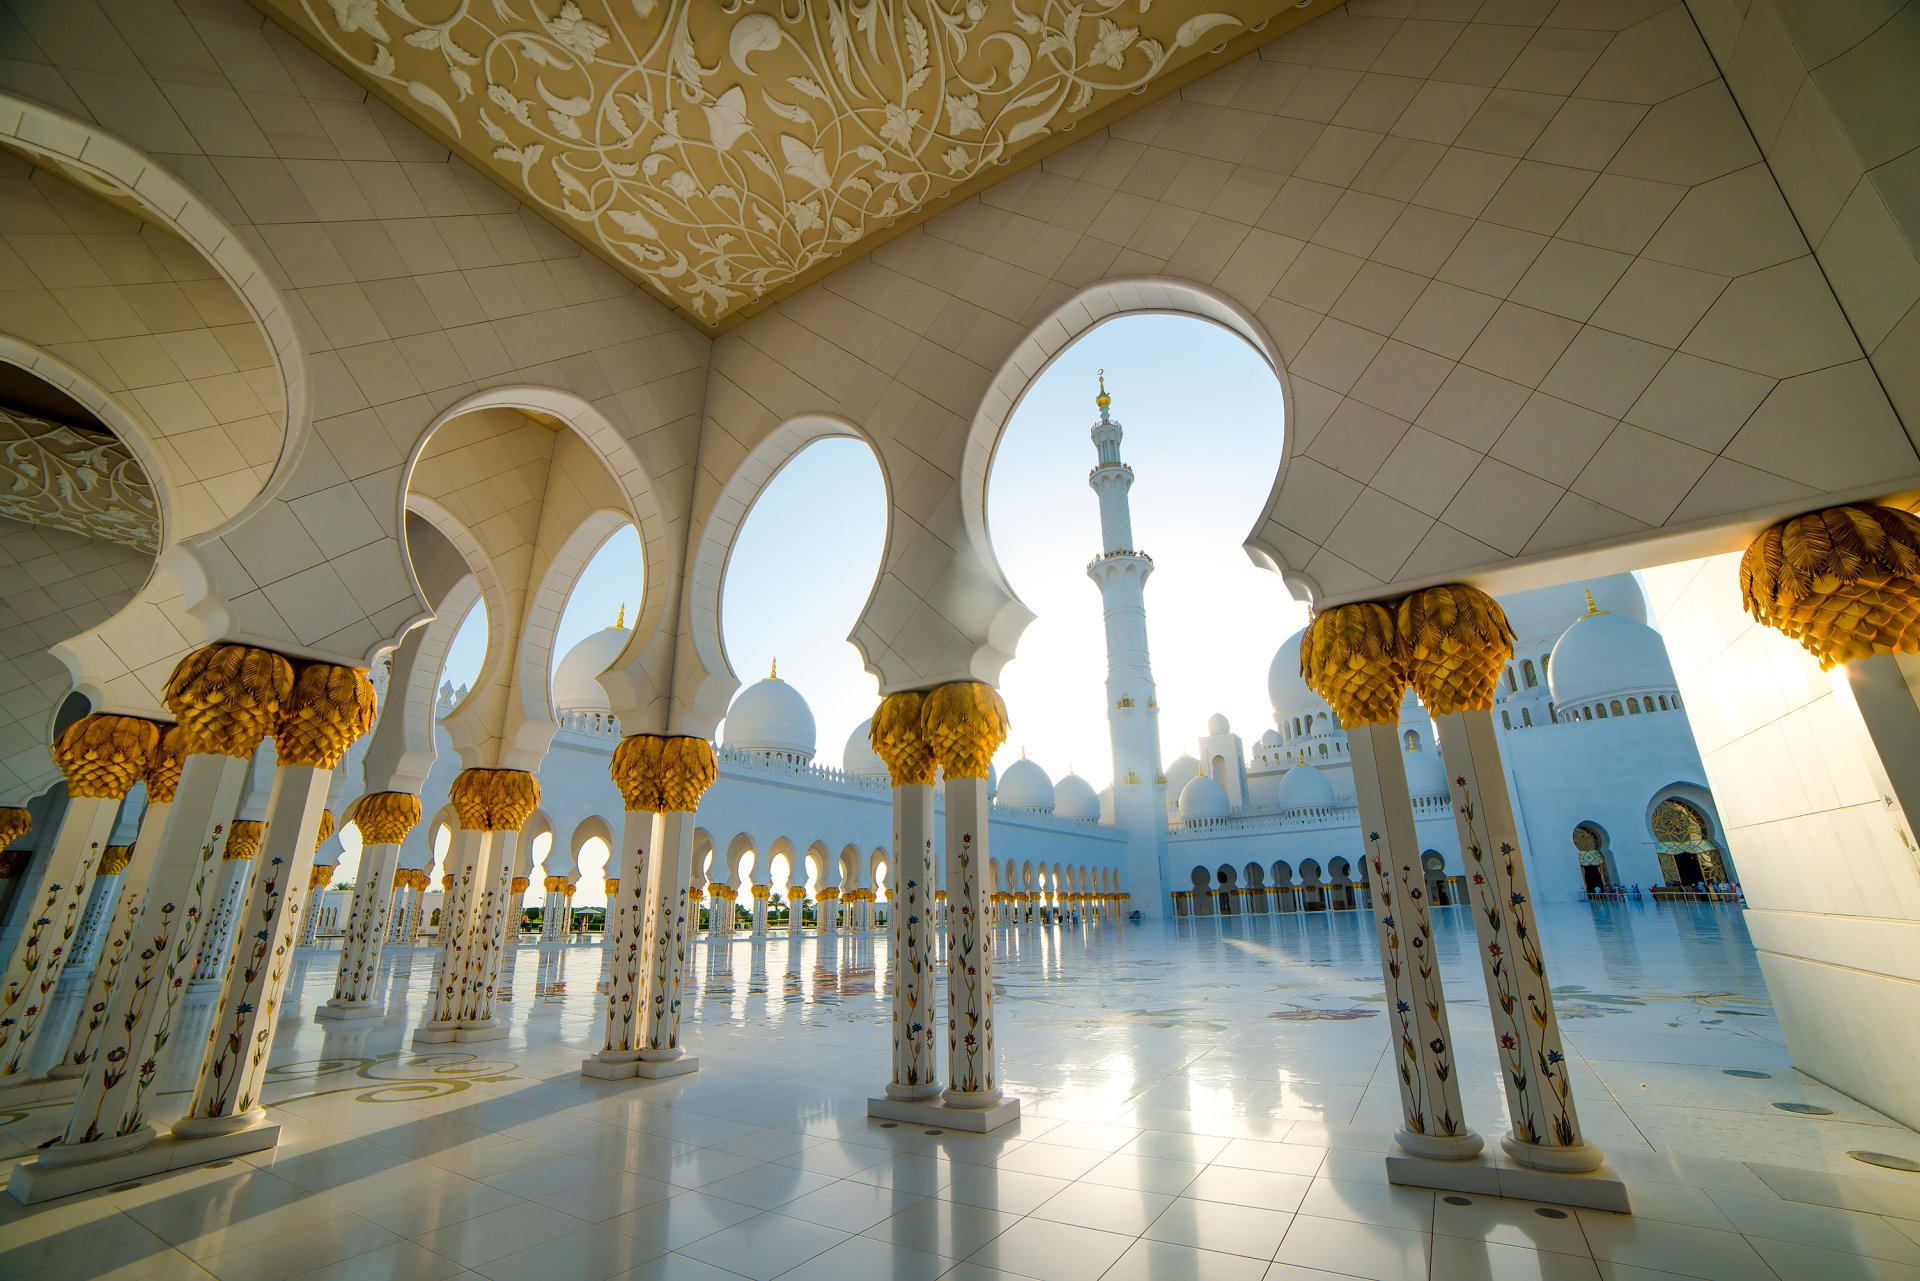 Download Religious Sheikh Zayed Grand Mosque  HD Wallpaper